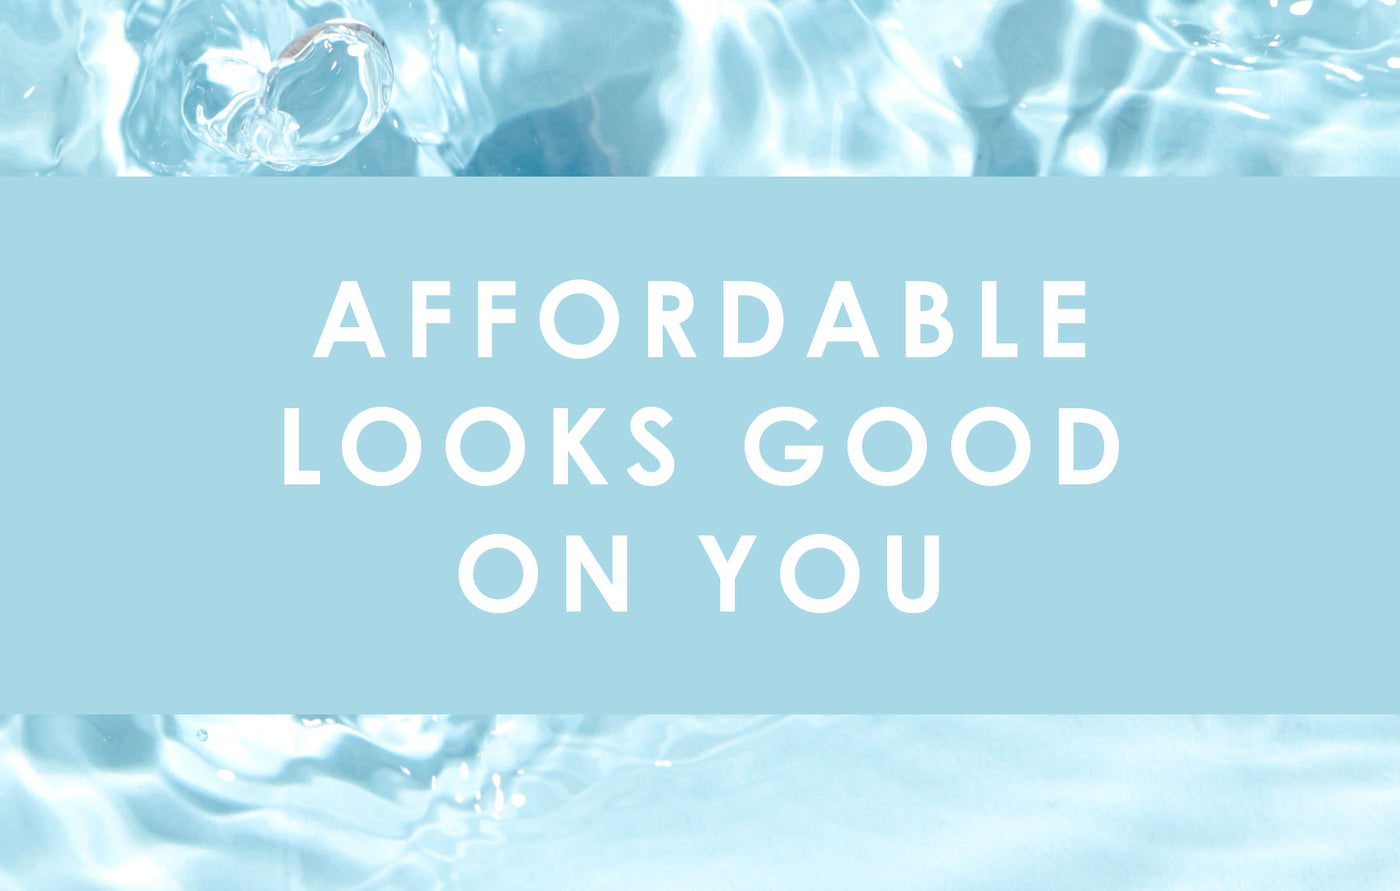 Affordable Looks Good On You - Affordable Makeup with MUA